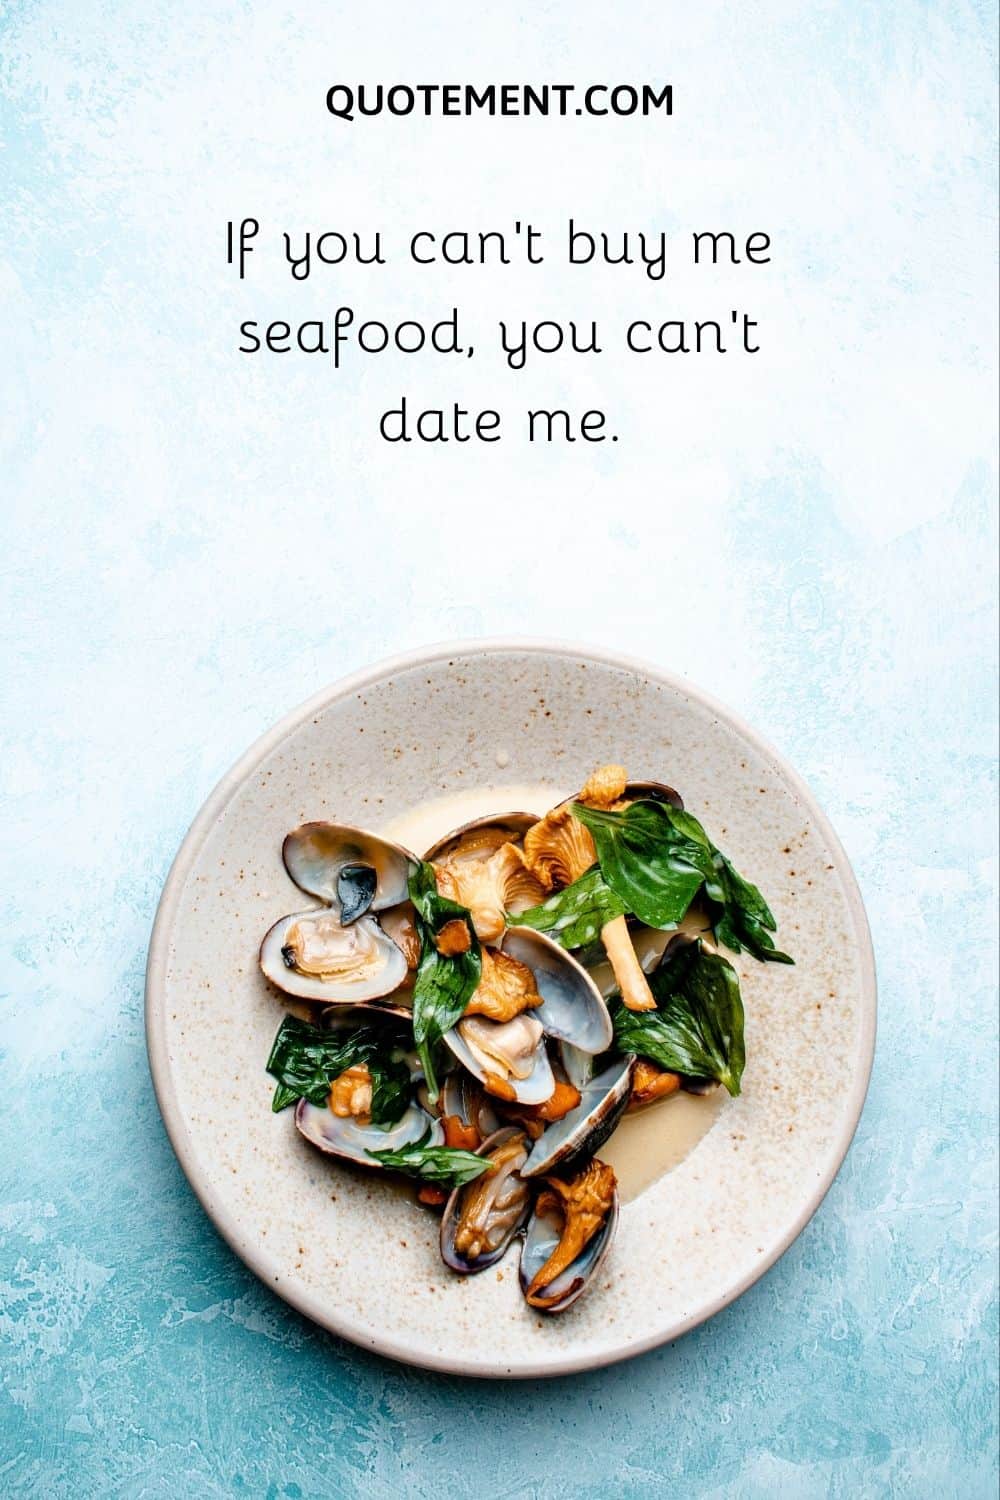 If you can’t buy me seafood, you can’t date me.